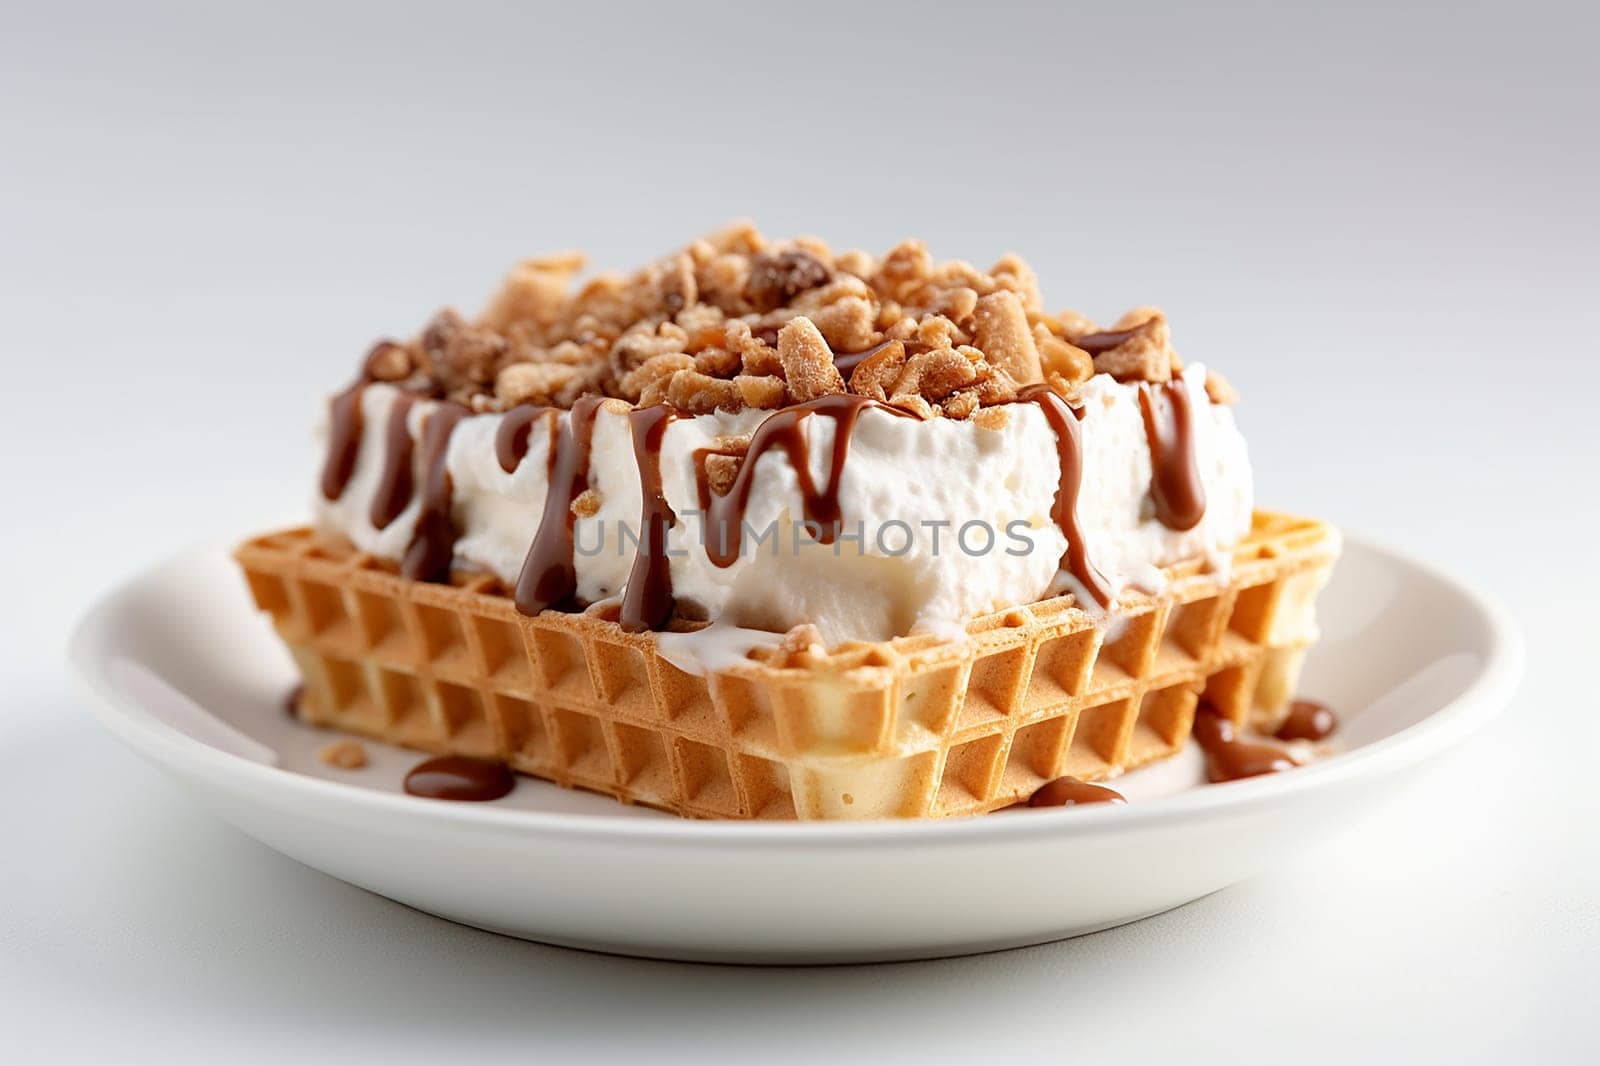 Close up Vanilla ice cream on waffles drizzled with caramel sauce and nuts. by Hype2art